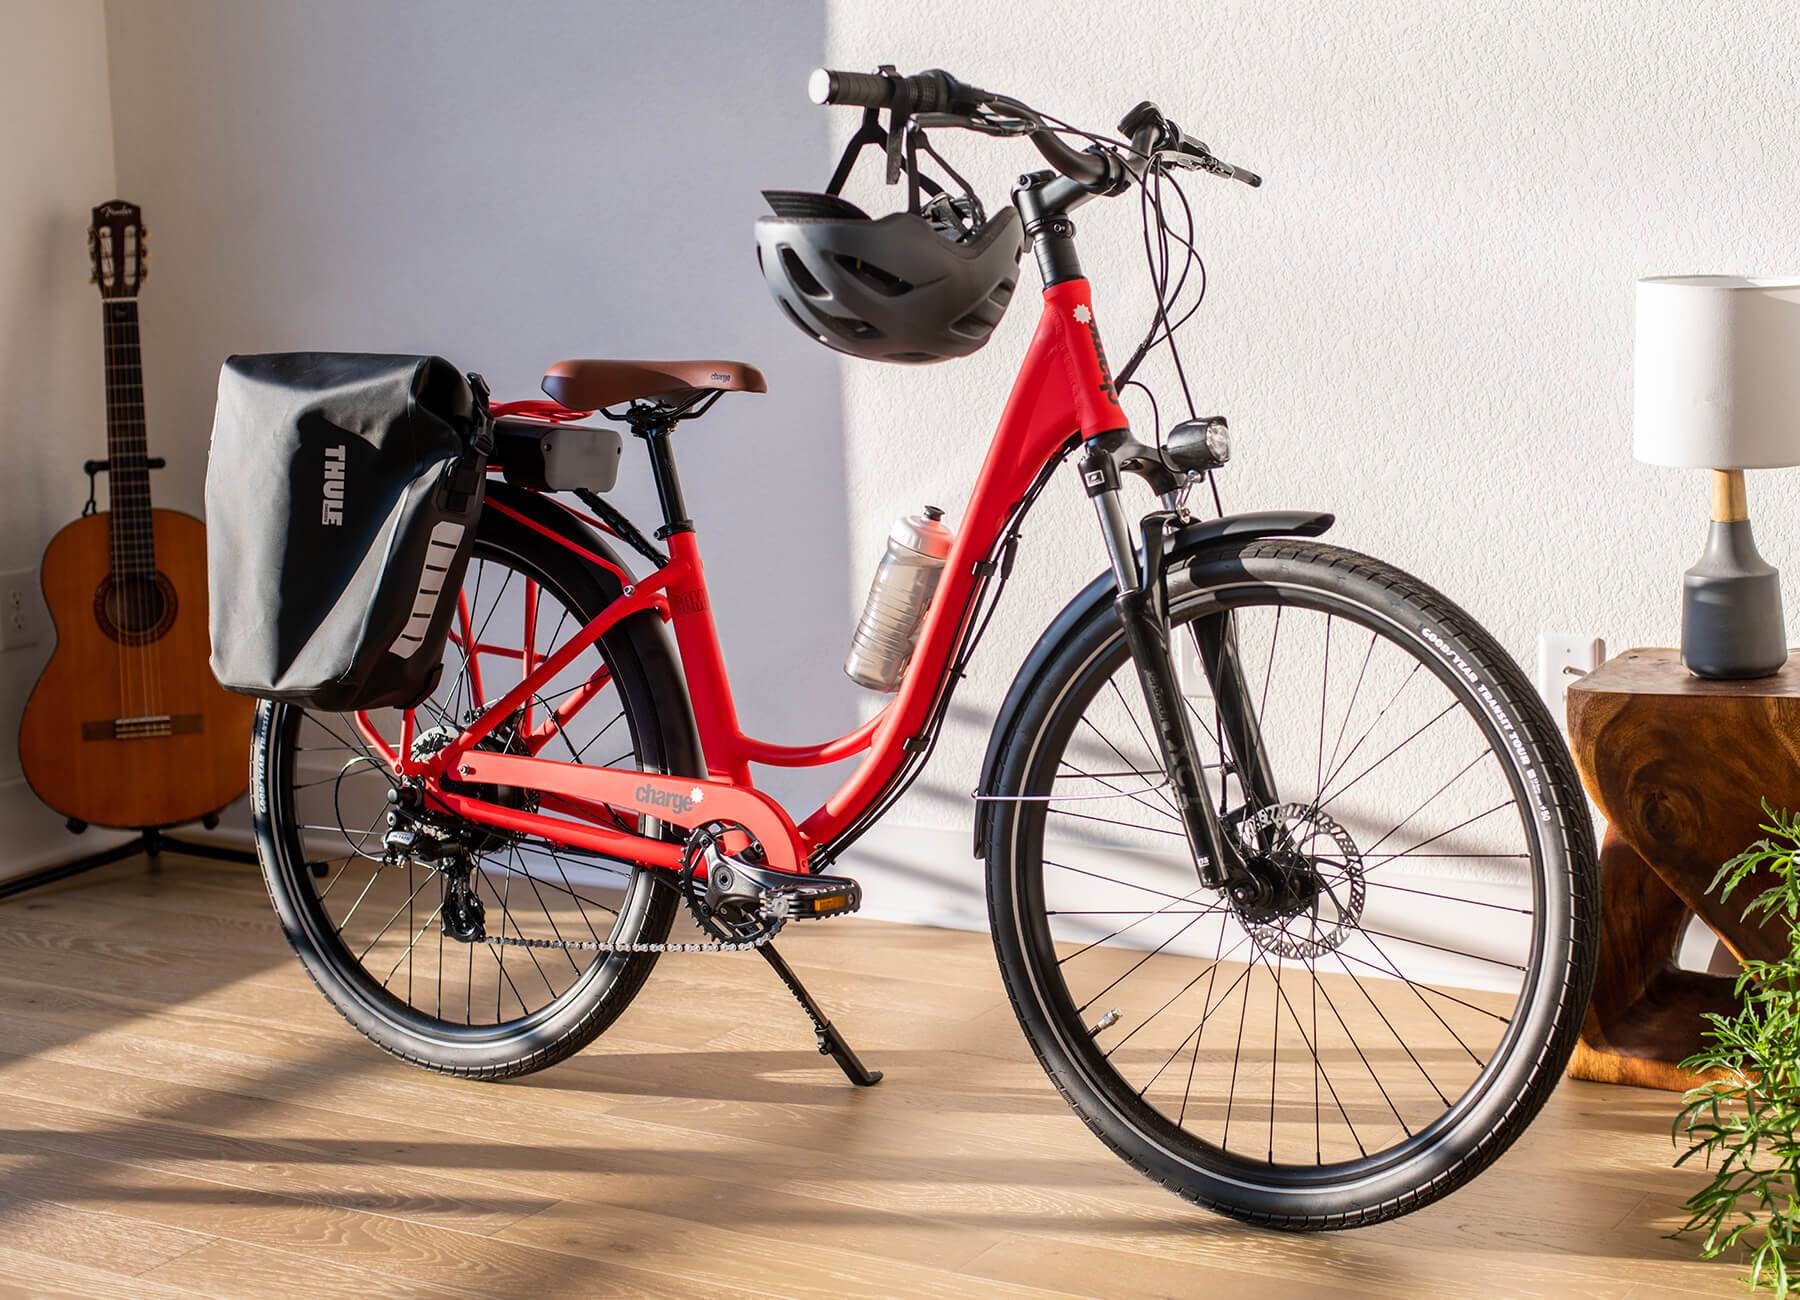 Charge electric bike in red with panniers